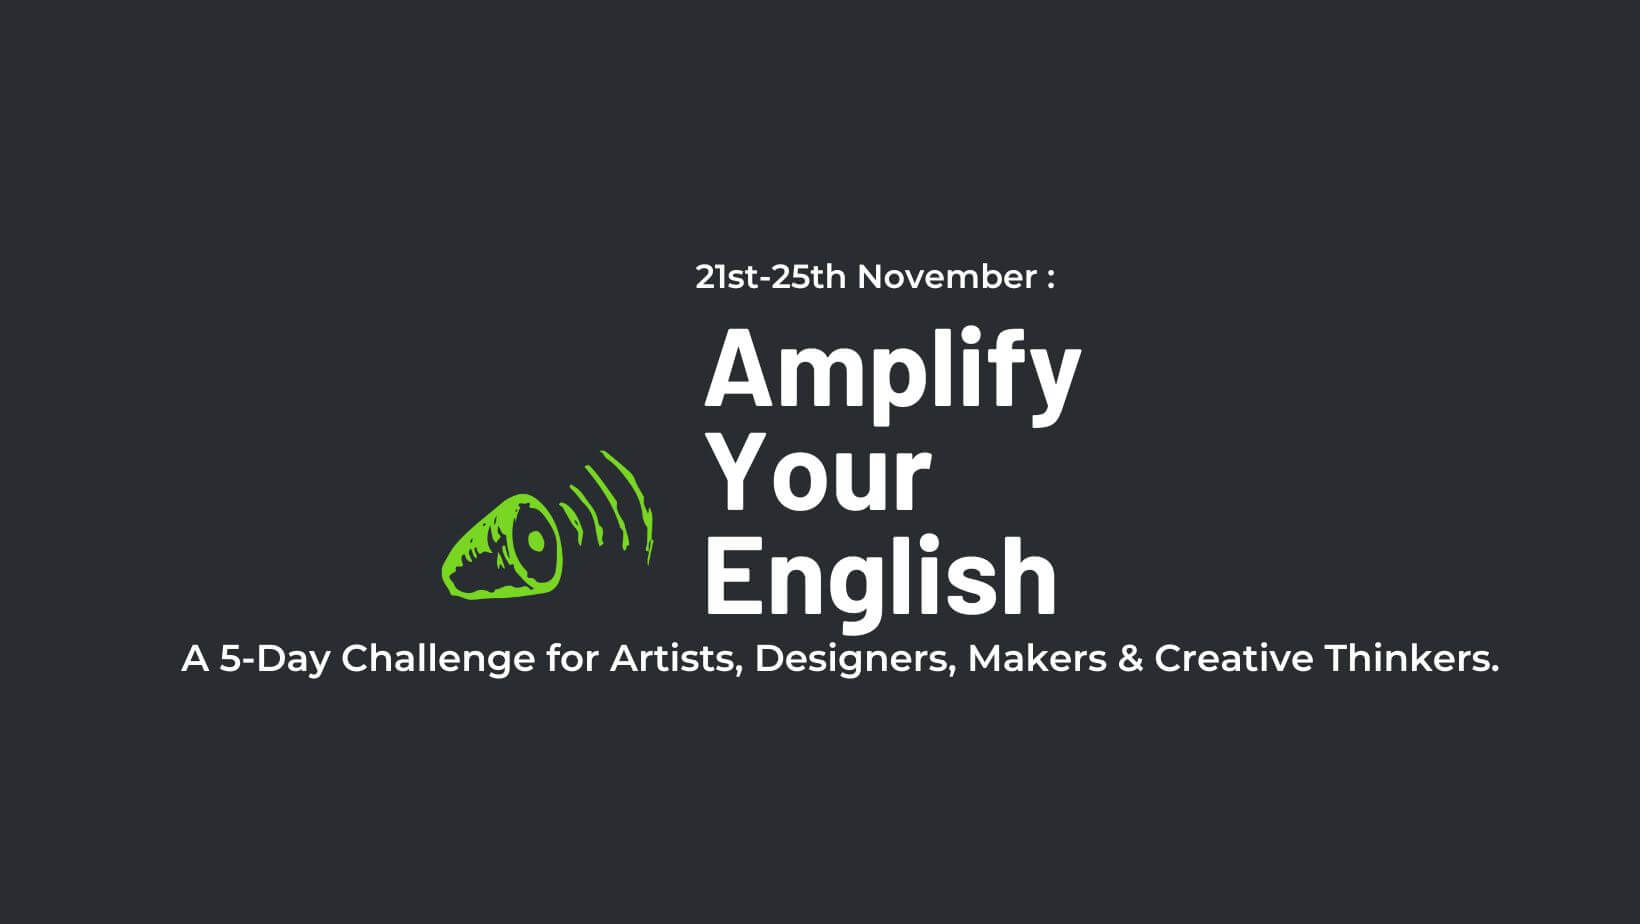 Amplify your English free workshop advert